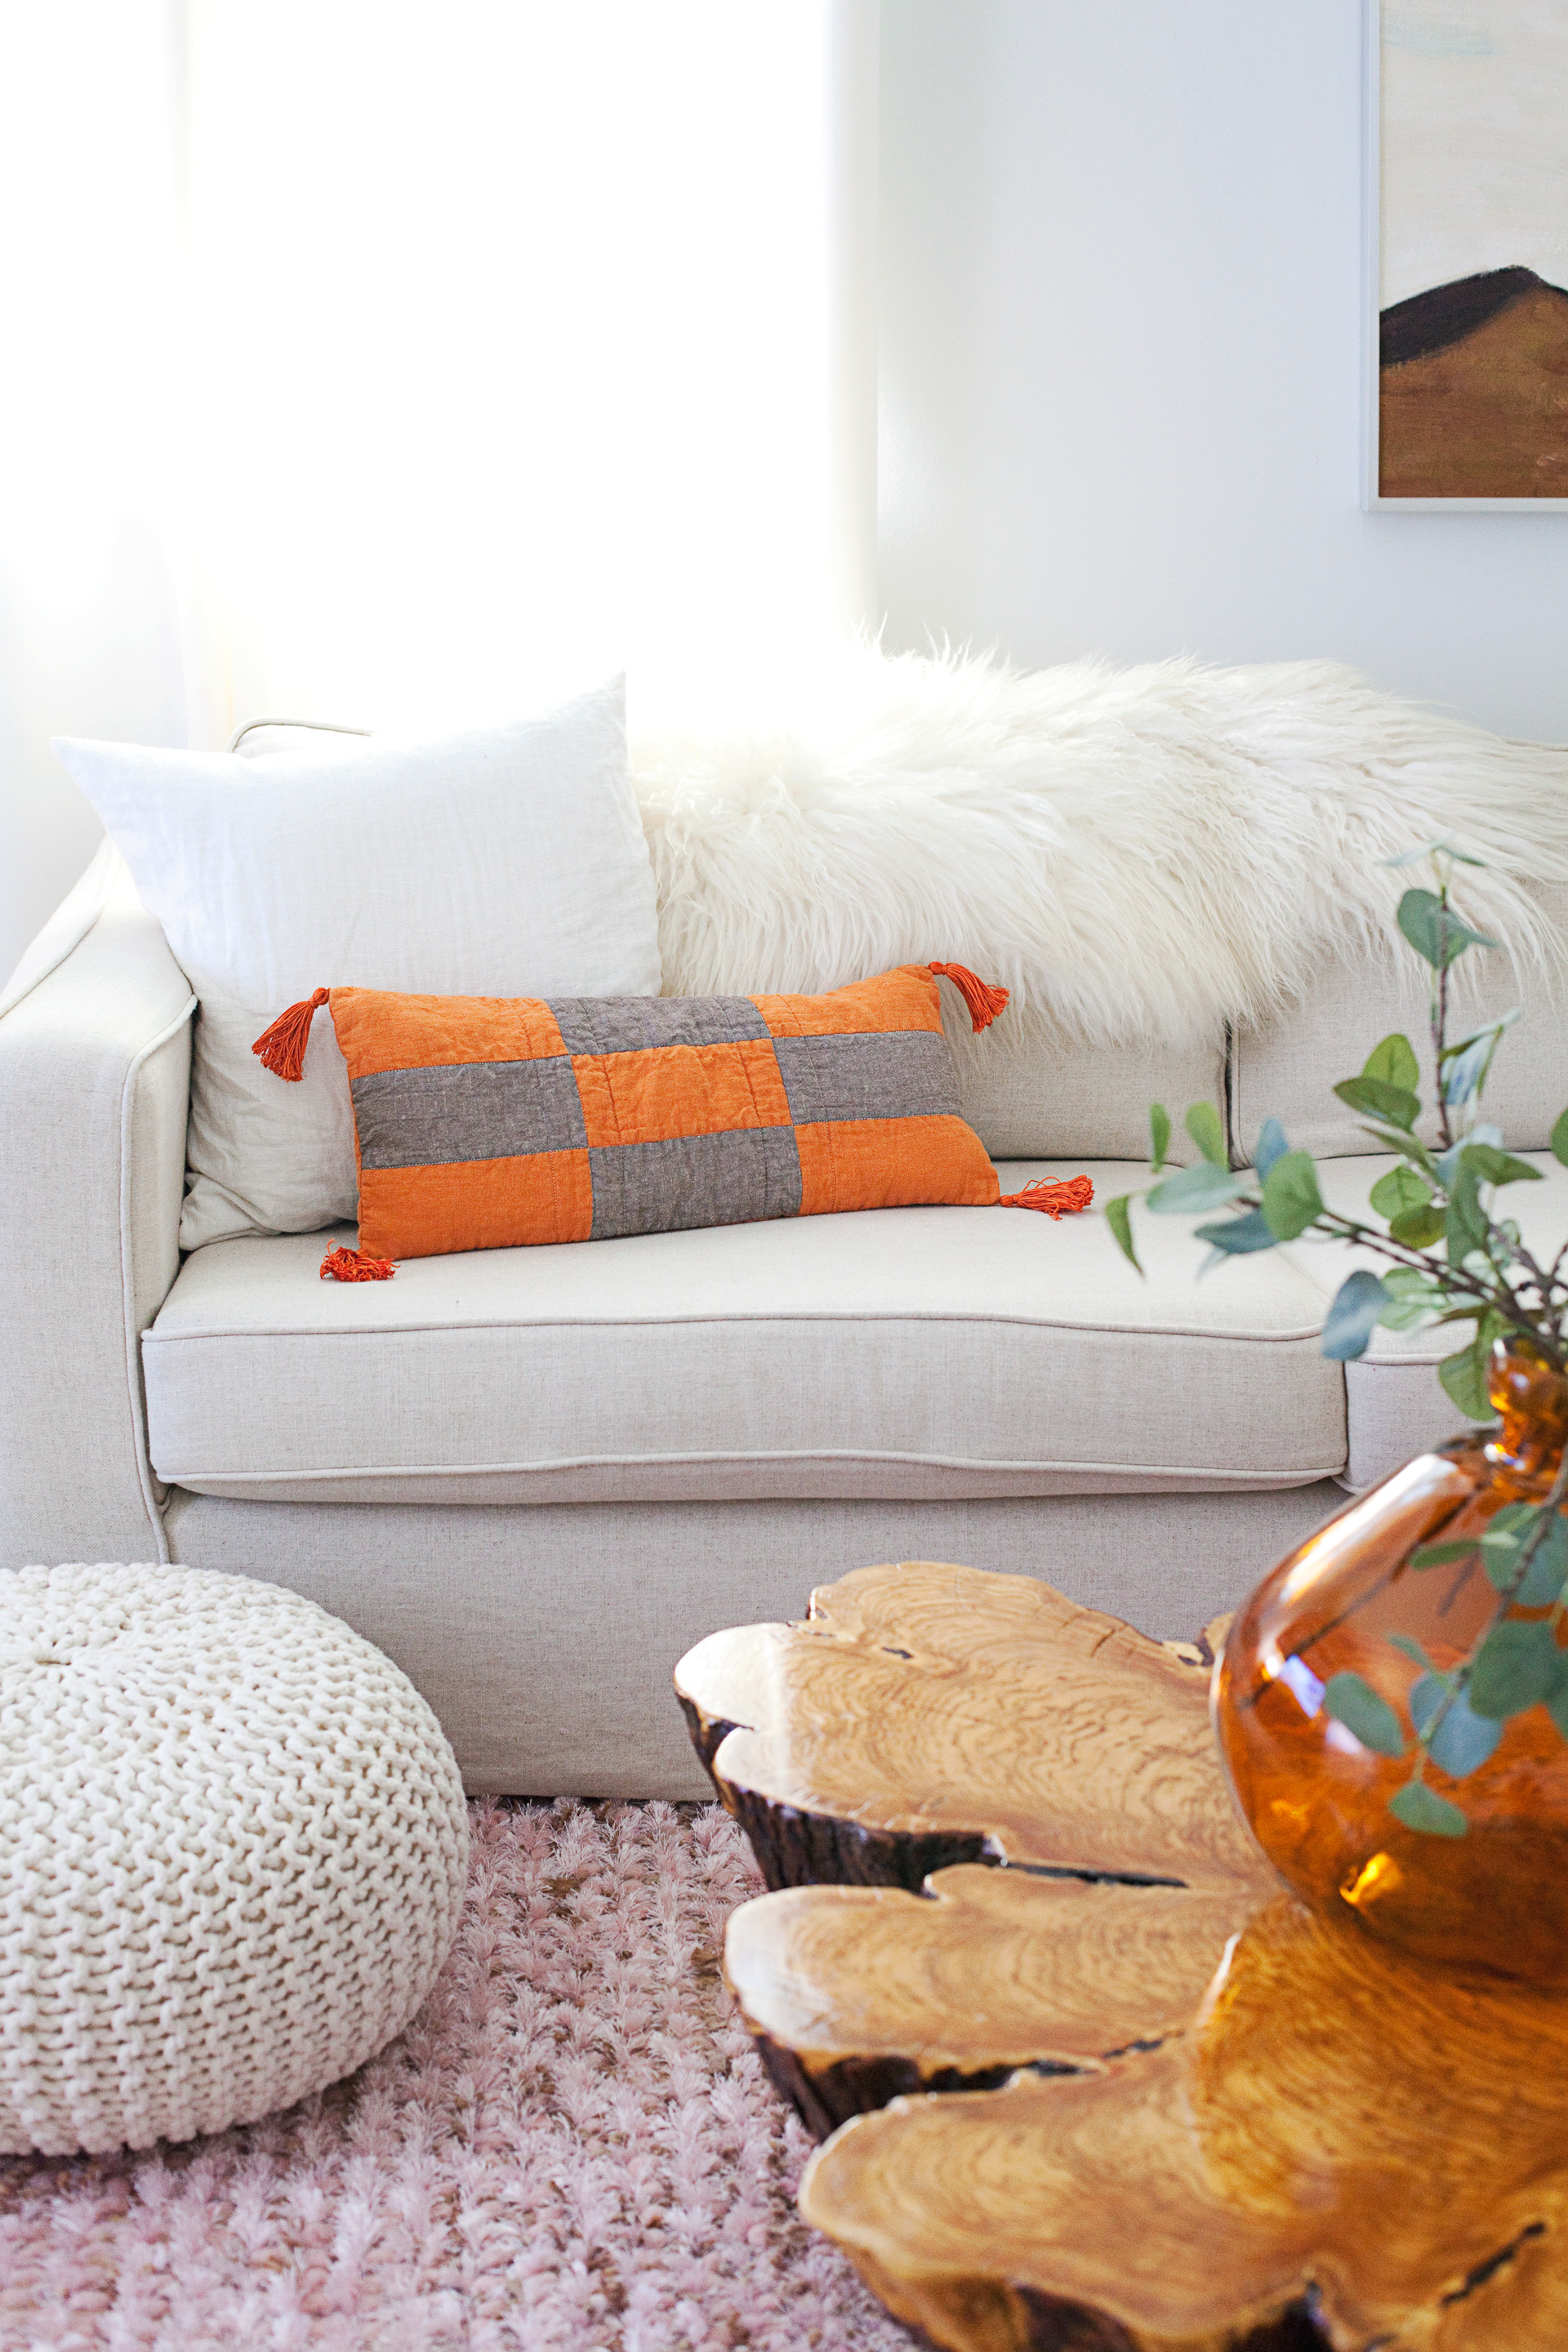 Modern Boho Patchwork Pillow - click through for detailed instructions